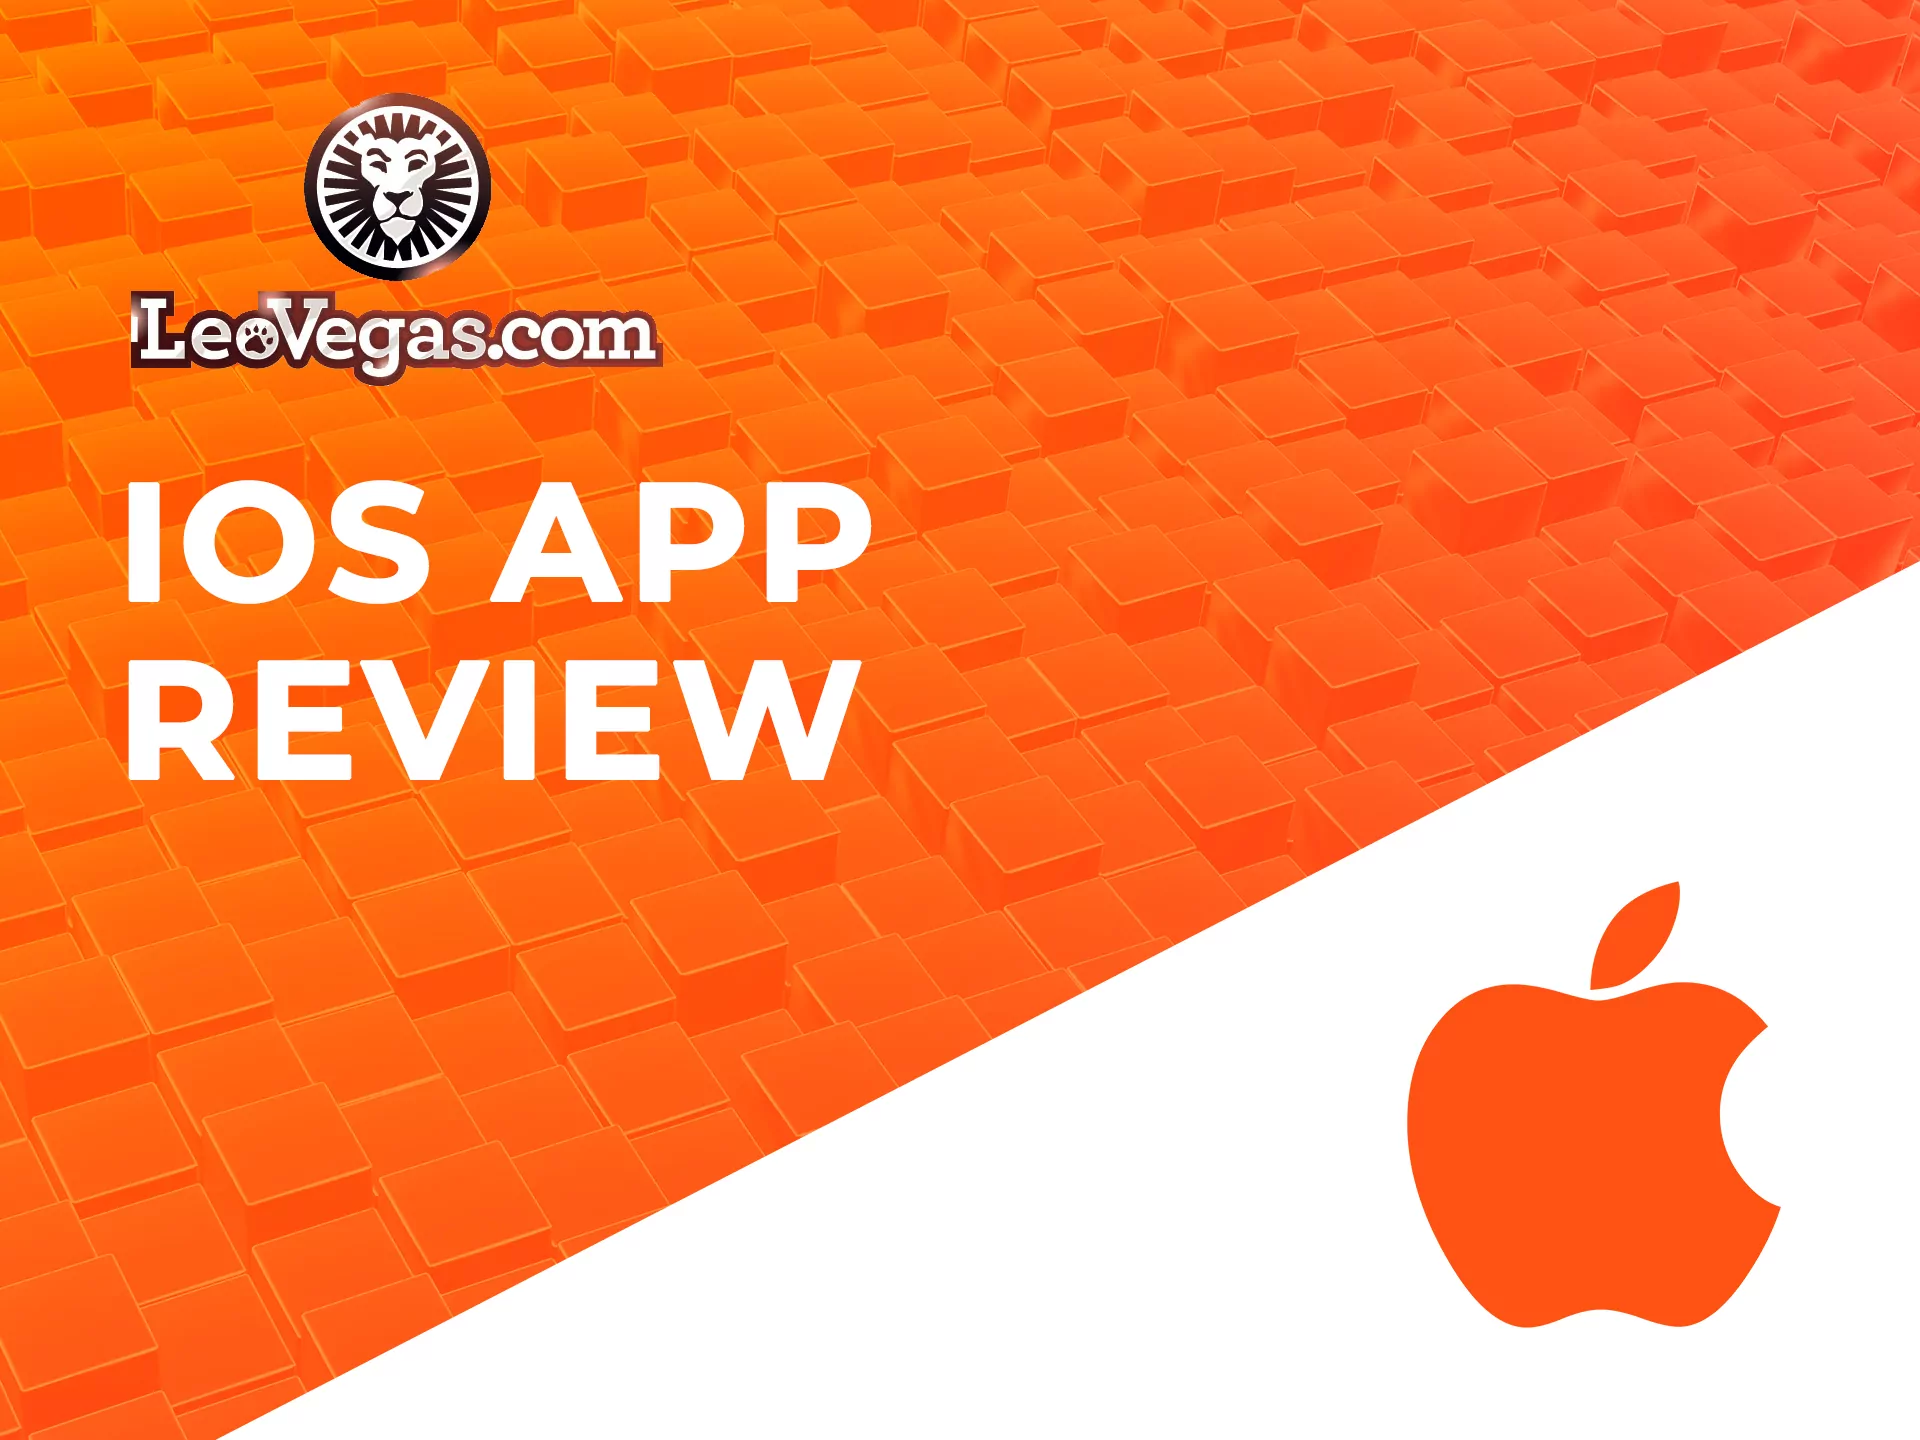 The LeoVegas iOS app is user-intuitive and user-friendly.